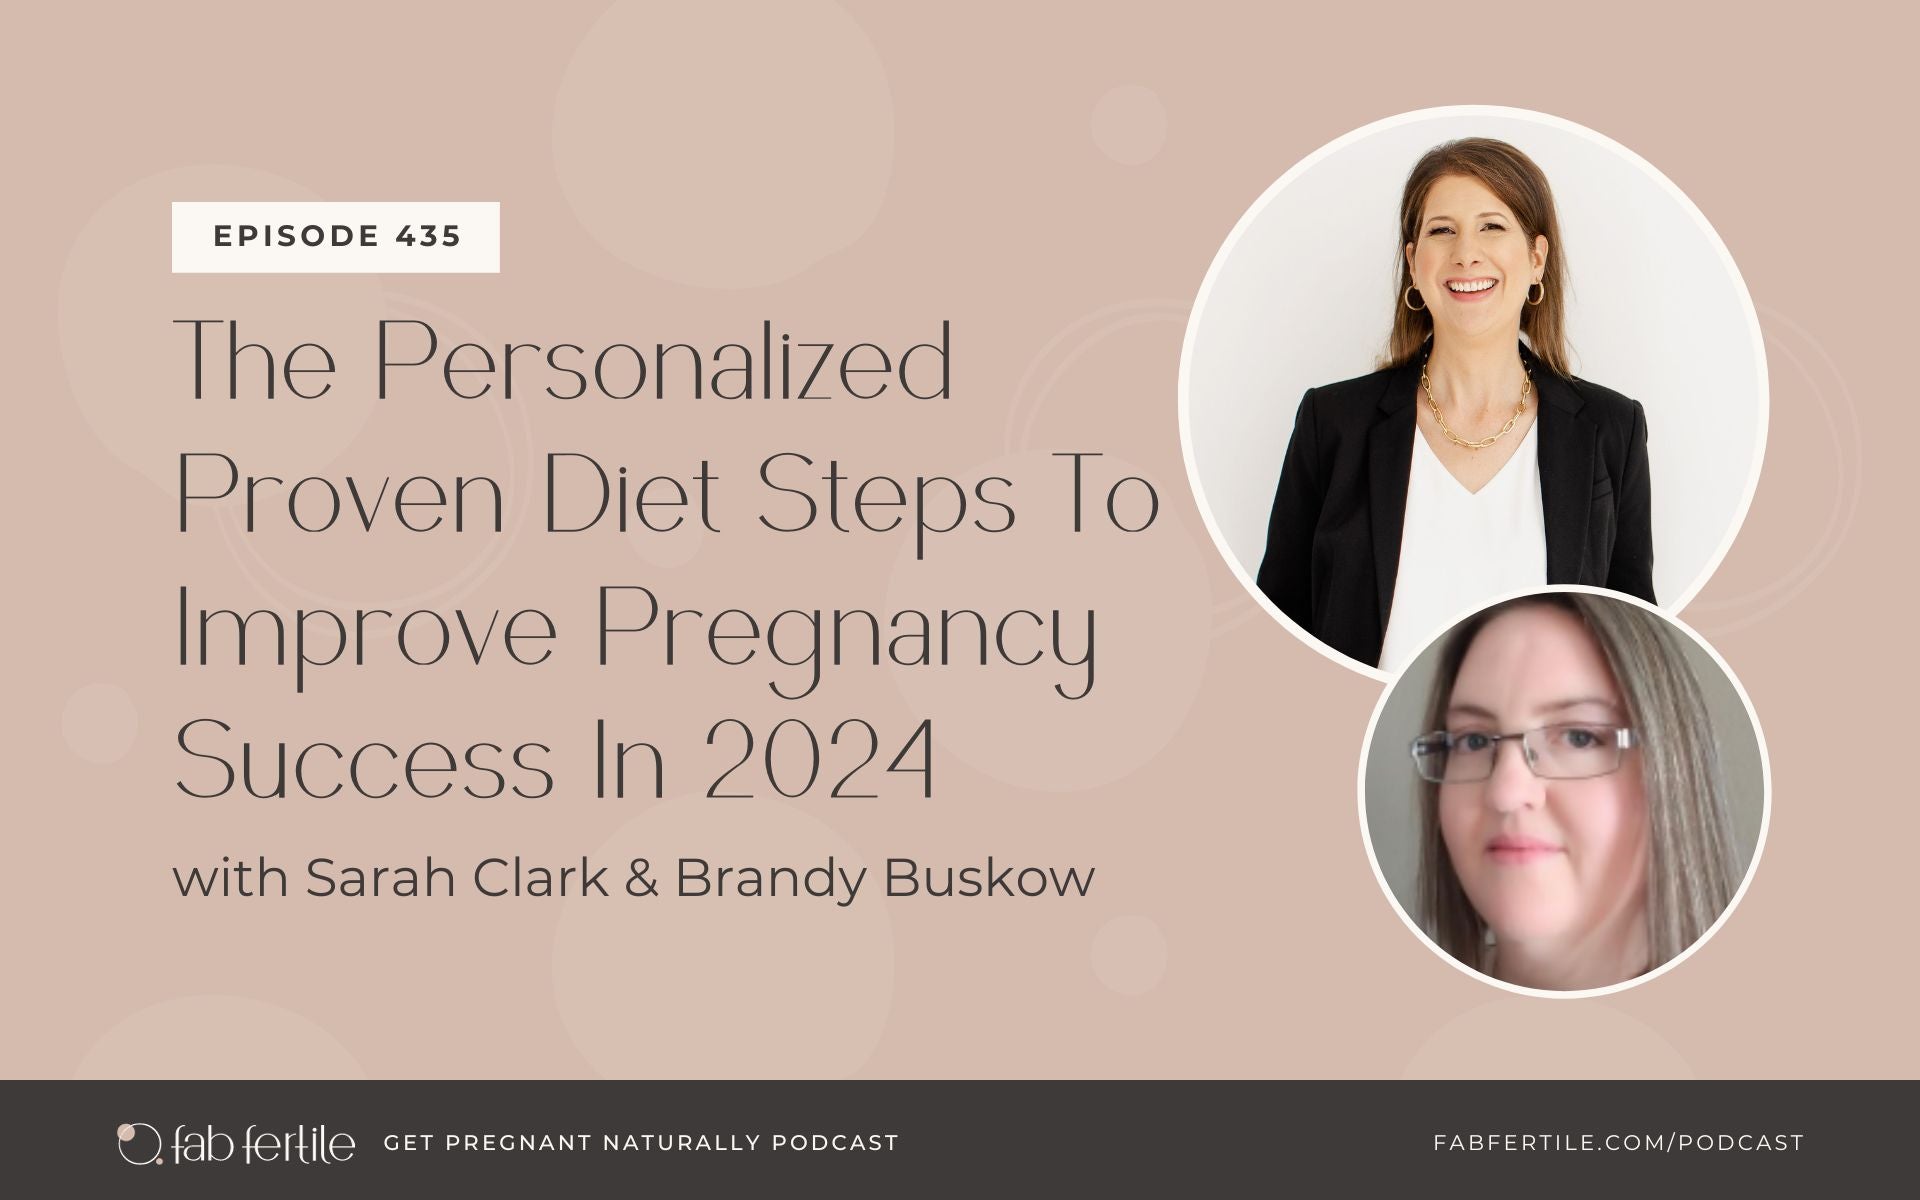 The Personalized Proven Diet Steps To Improve Pregnancy Success In 2024